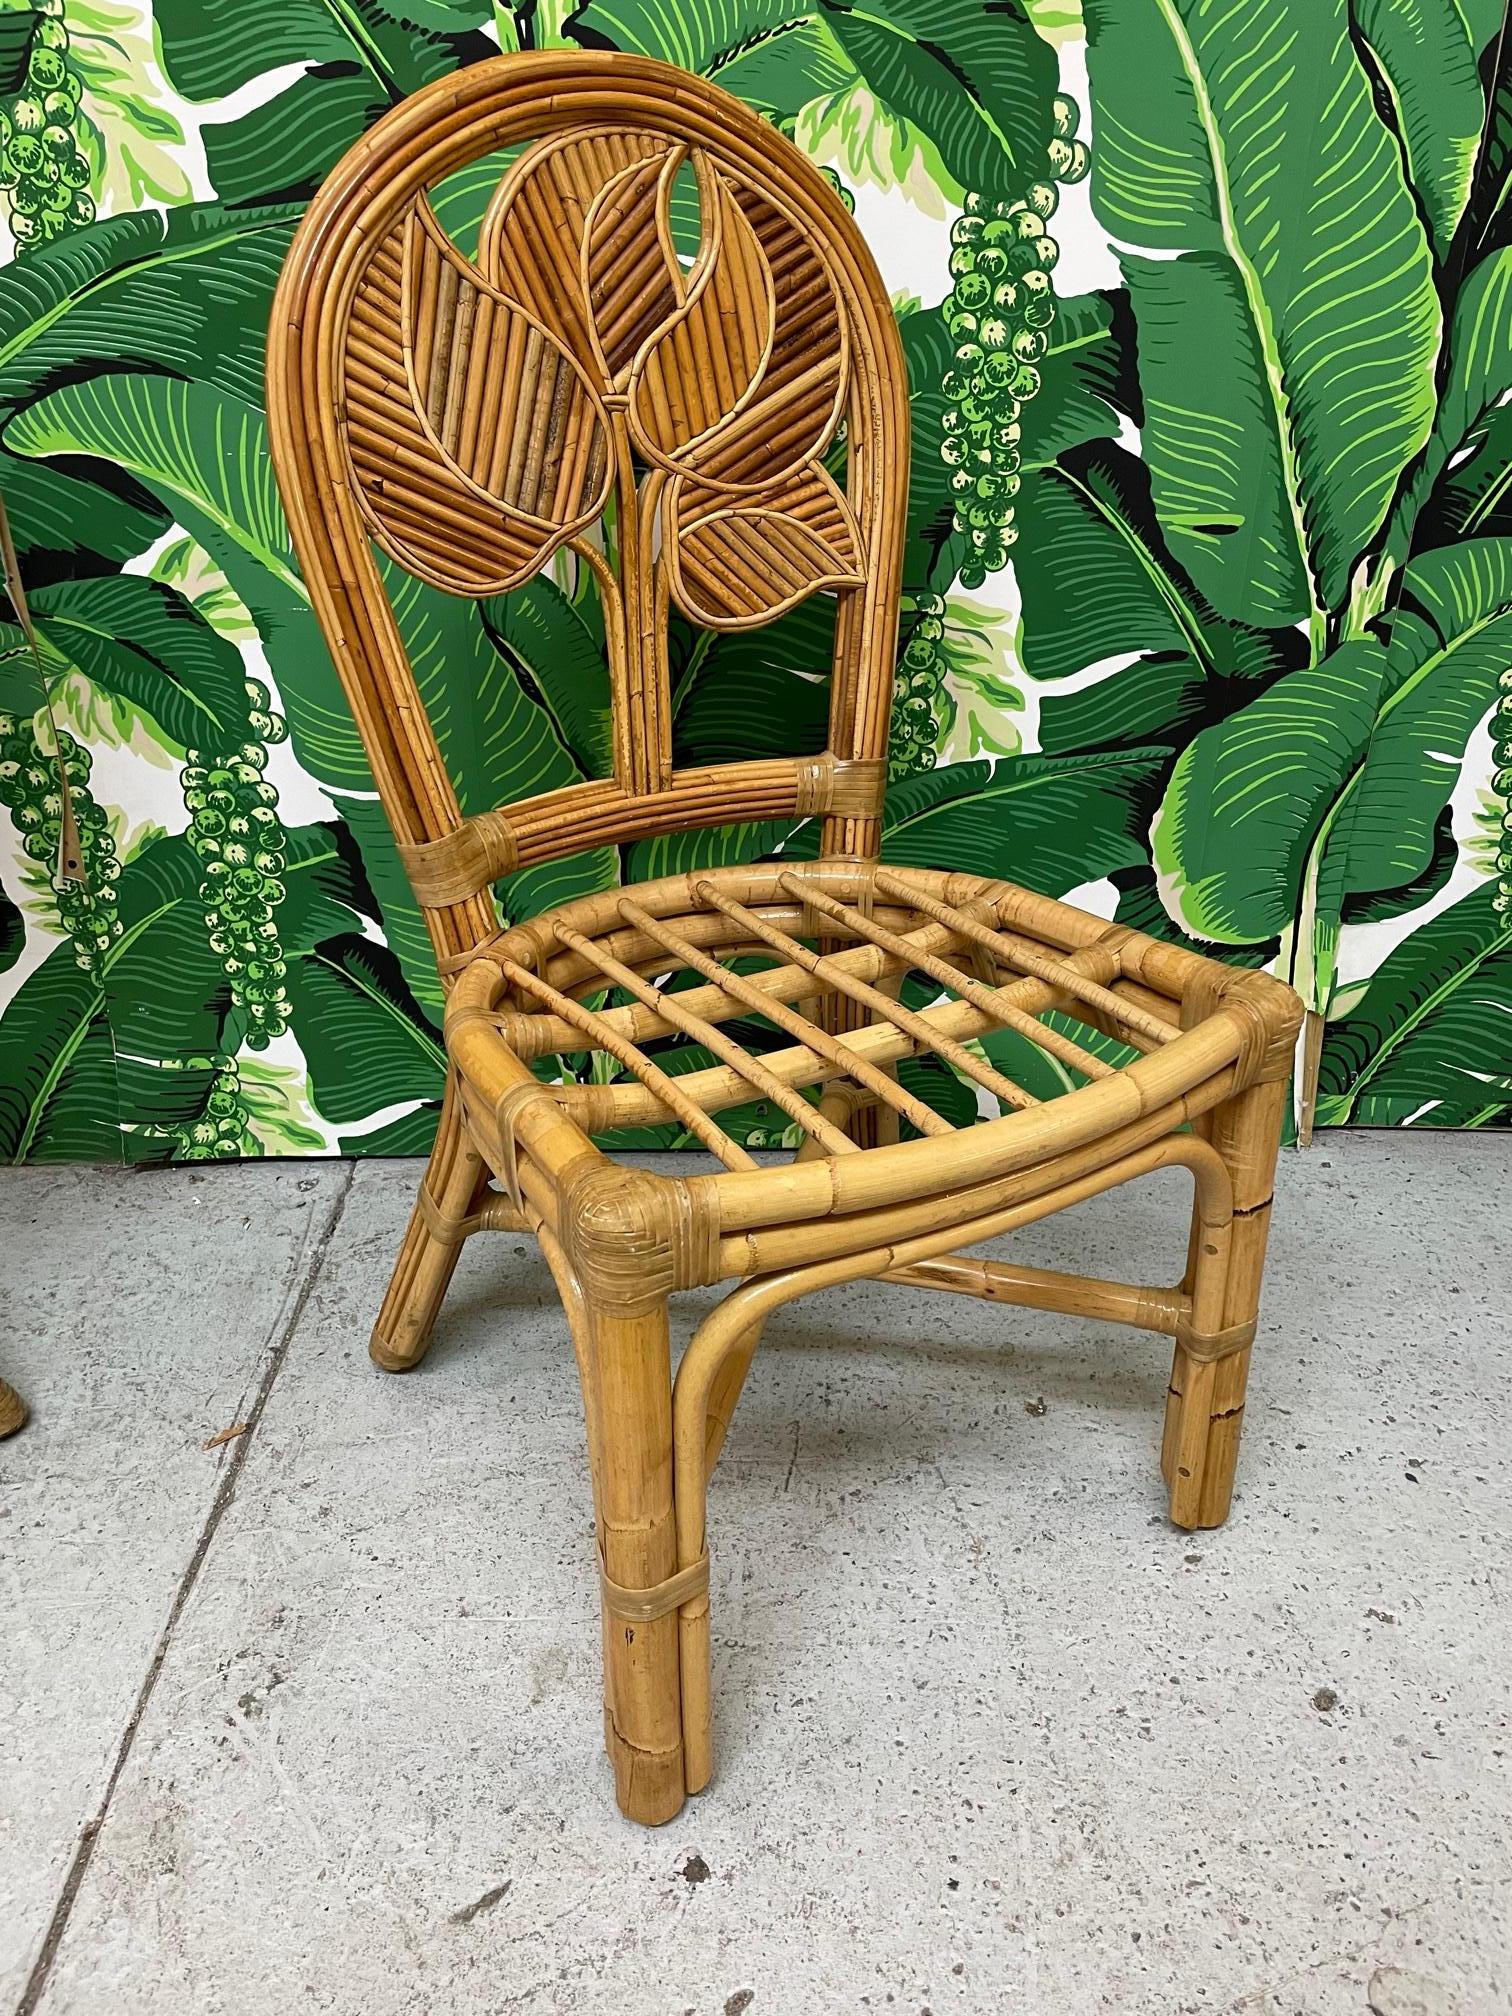 Set of six rattan dining chairs feature pencil reed detailing in a tropical palm motif.  Excellent condition with only very minor imperfections consistent with age.